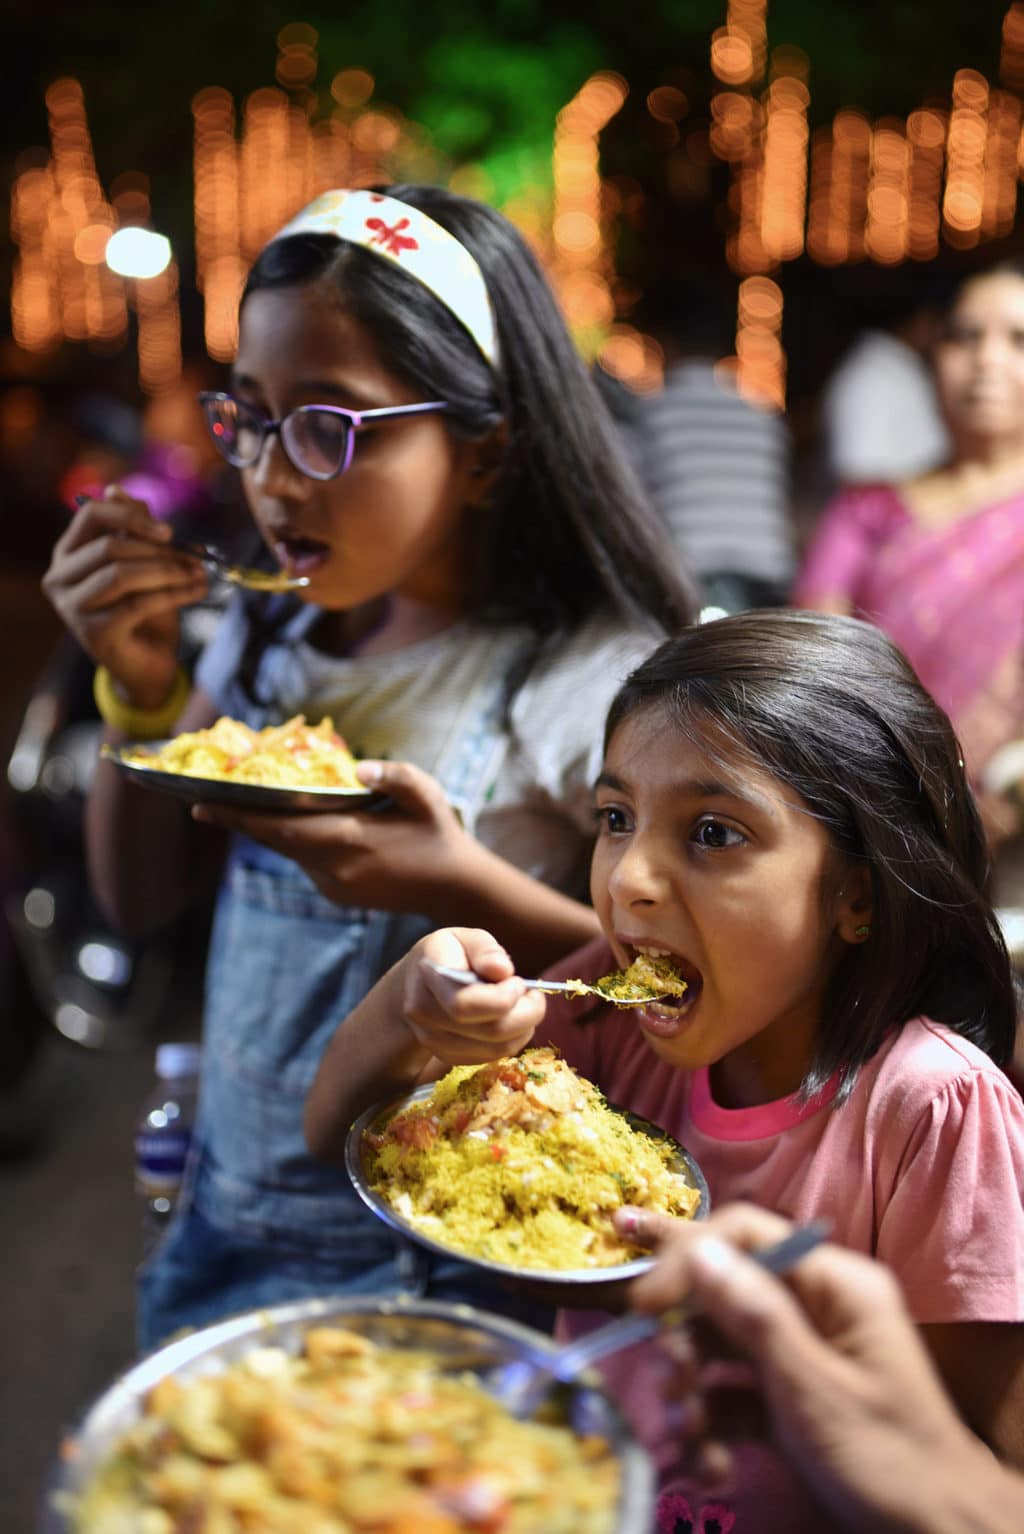 Food safety issues for Indian street food vendors 